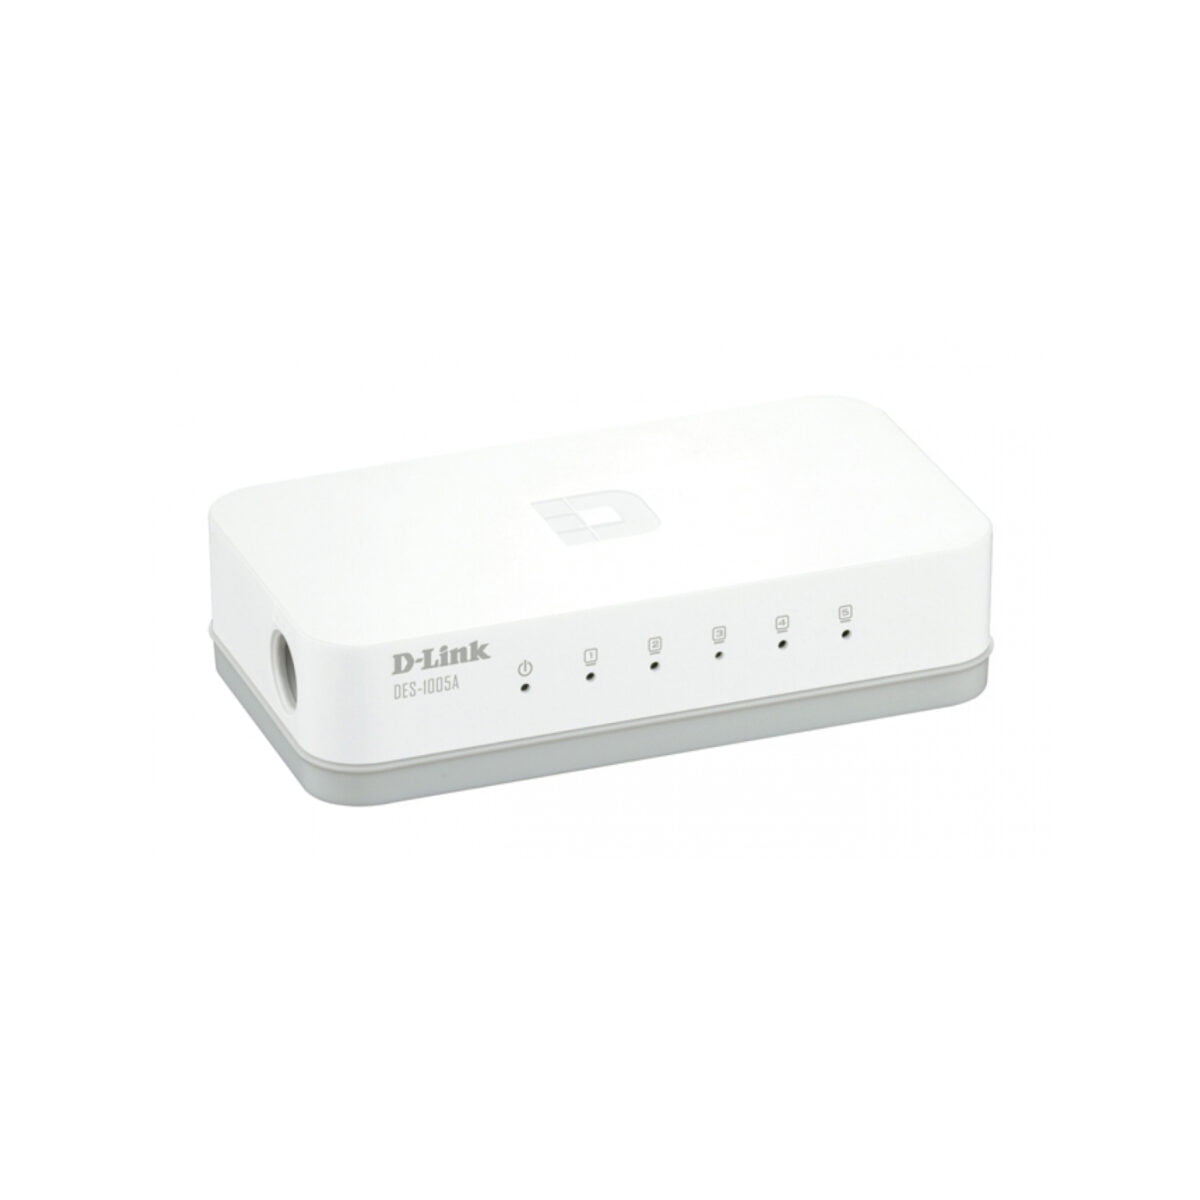 D-LINK NETWORK SWITCH DGS-1005A 5 PORTS